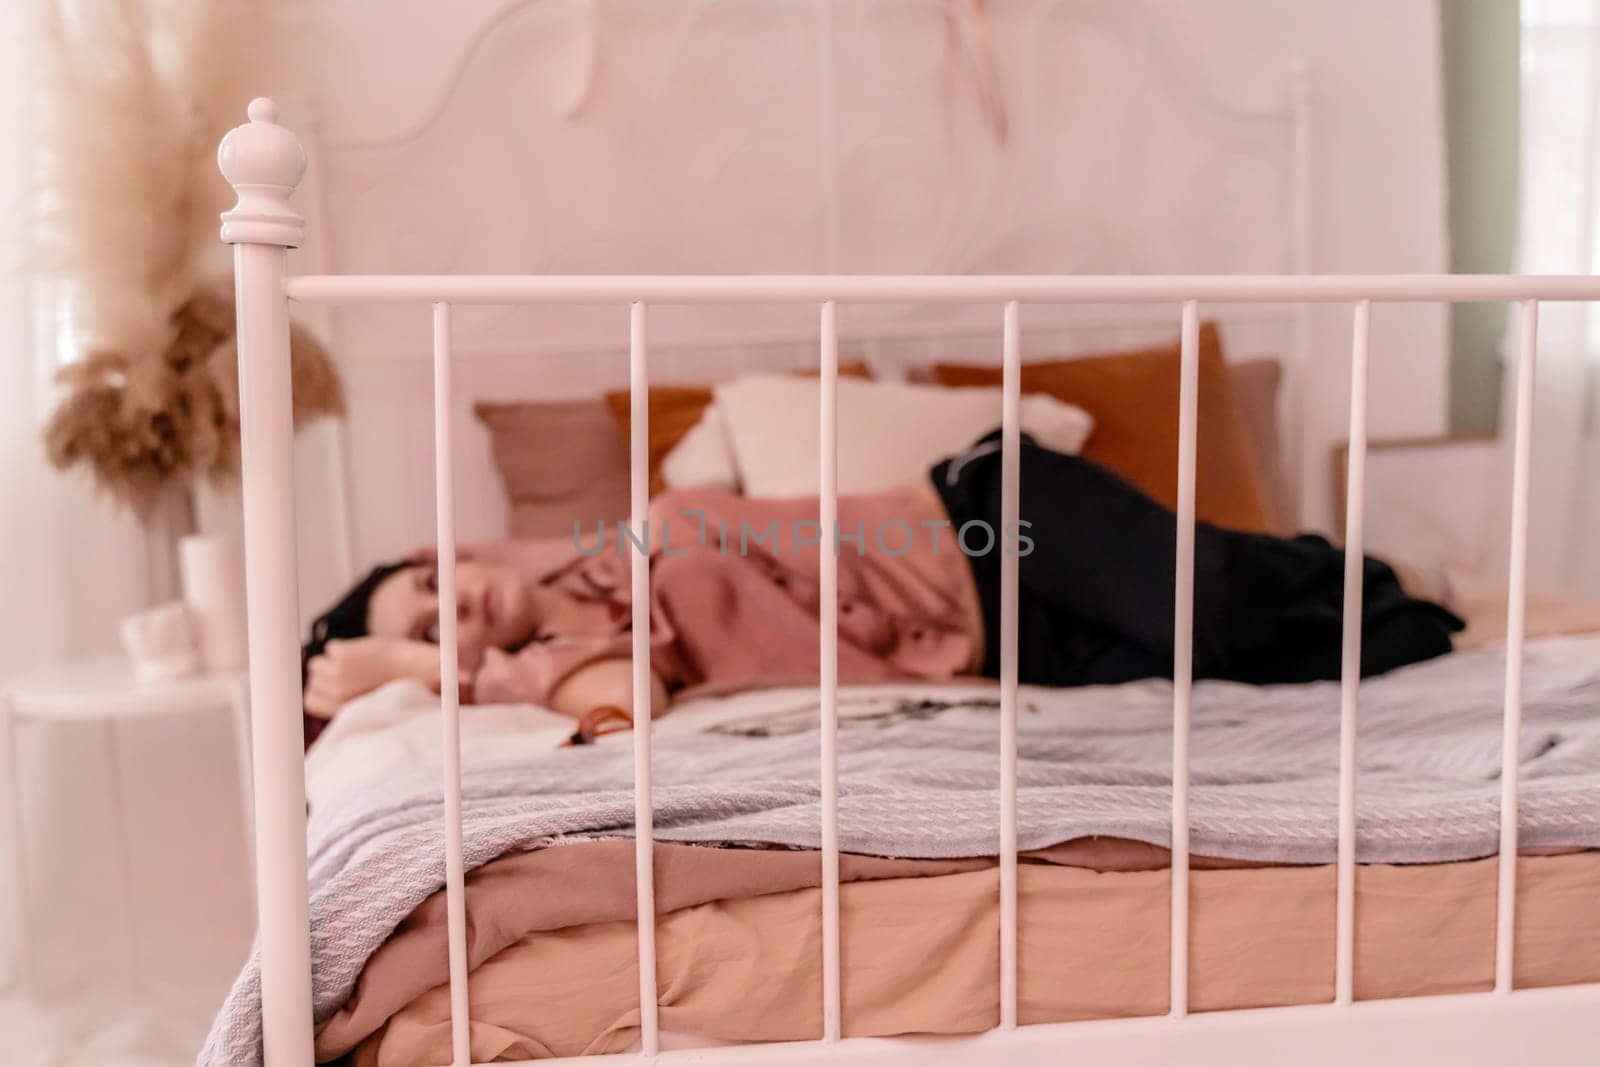 A woman is laying on a bed with a white metal frame. She is wearing a pink shirt and is resting her head on her hand. The bed is covered in a white blanket and pillows